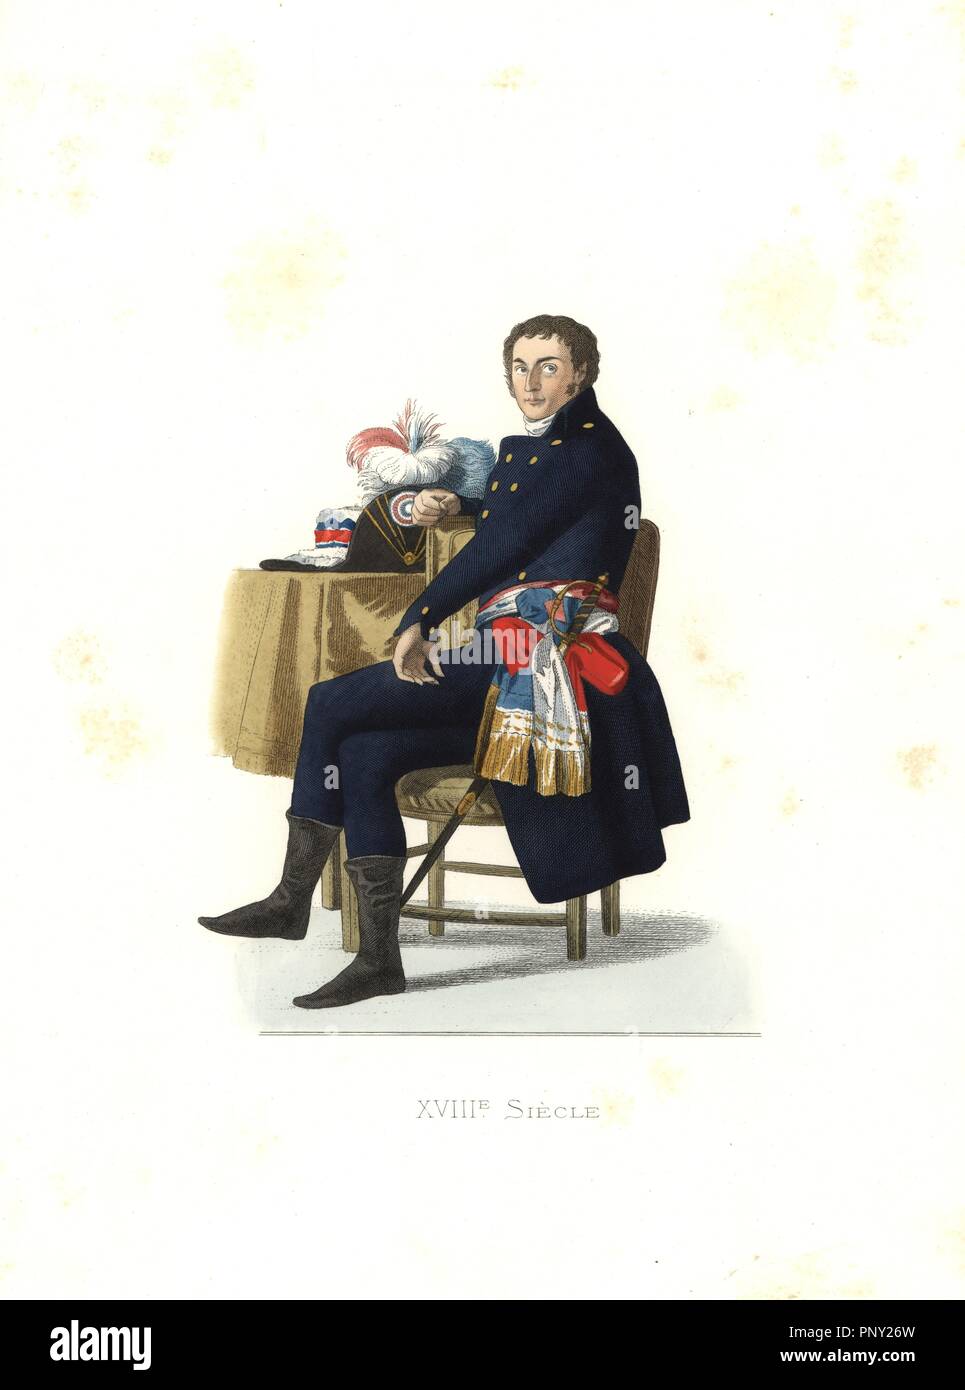 Guillemardet, Ambassador of the French Republic, France, 18th century. Handcolored illustration by E. Lechevallier-Chevignard, lithographed by A. Didier, L. Flameng, F. Laguillermie, from Georges Duplessis's 'Costumes historiques des XVIe, XVIIe et XVIIIe siecles' (Historical costumes of the 16th, 17th and 18th centuries), Paris 1867. The book was a continuation of the series on the costumes of the 12th to 15th centuries published by Camille Bonnard and Paul Mercuri from 1830. Georges Duplessis (1834-1899) was curator of the Prints department at the Bibliotheque nationale. Edmond Lechevallier- Stock Photo